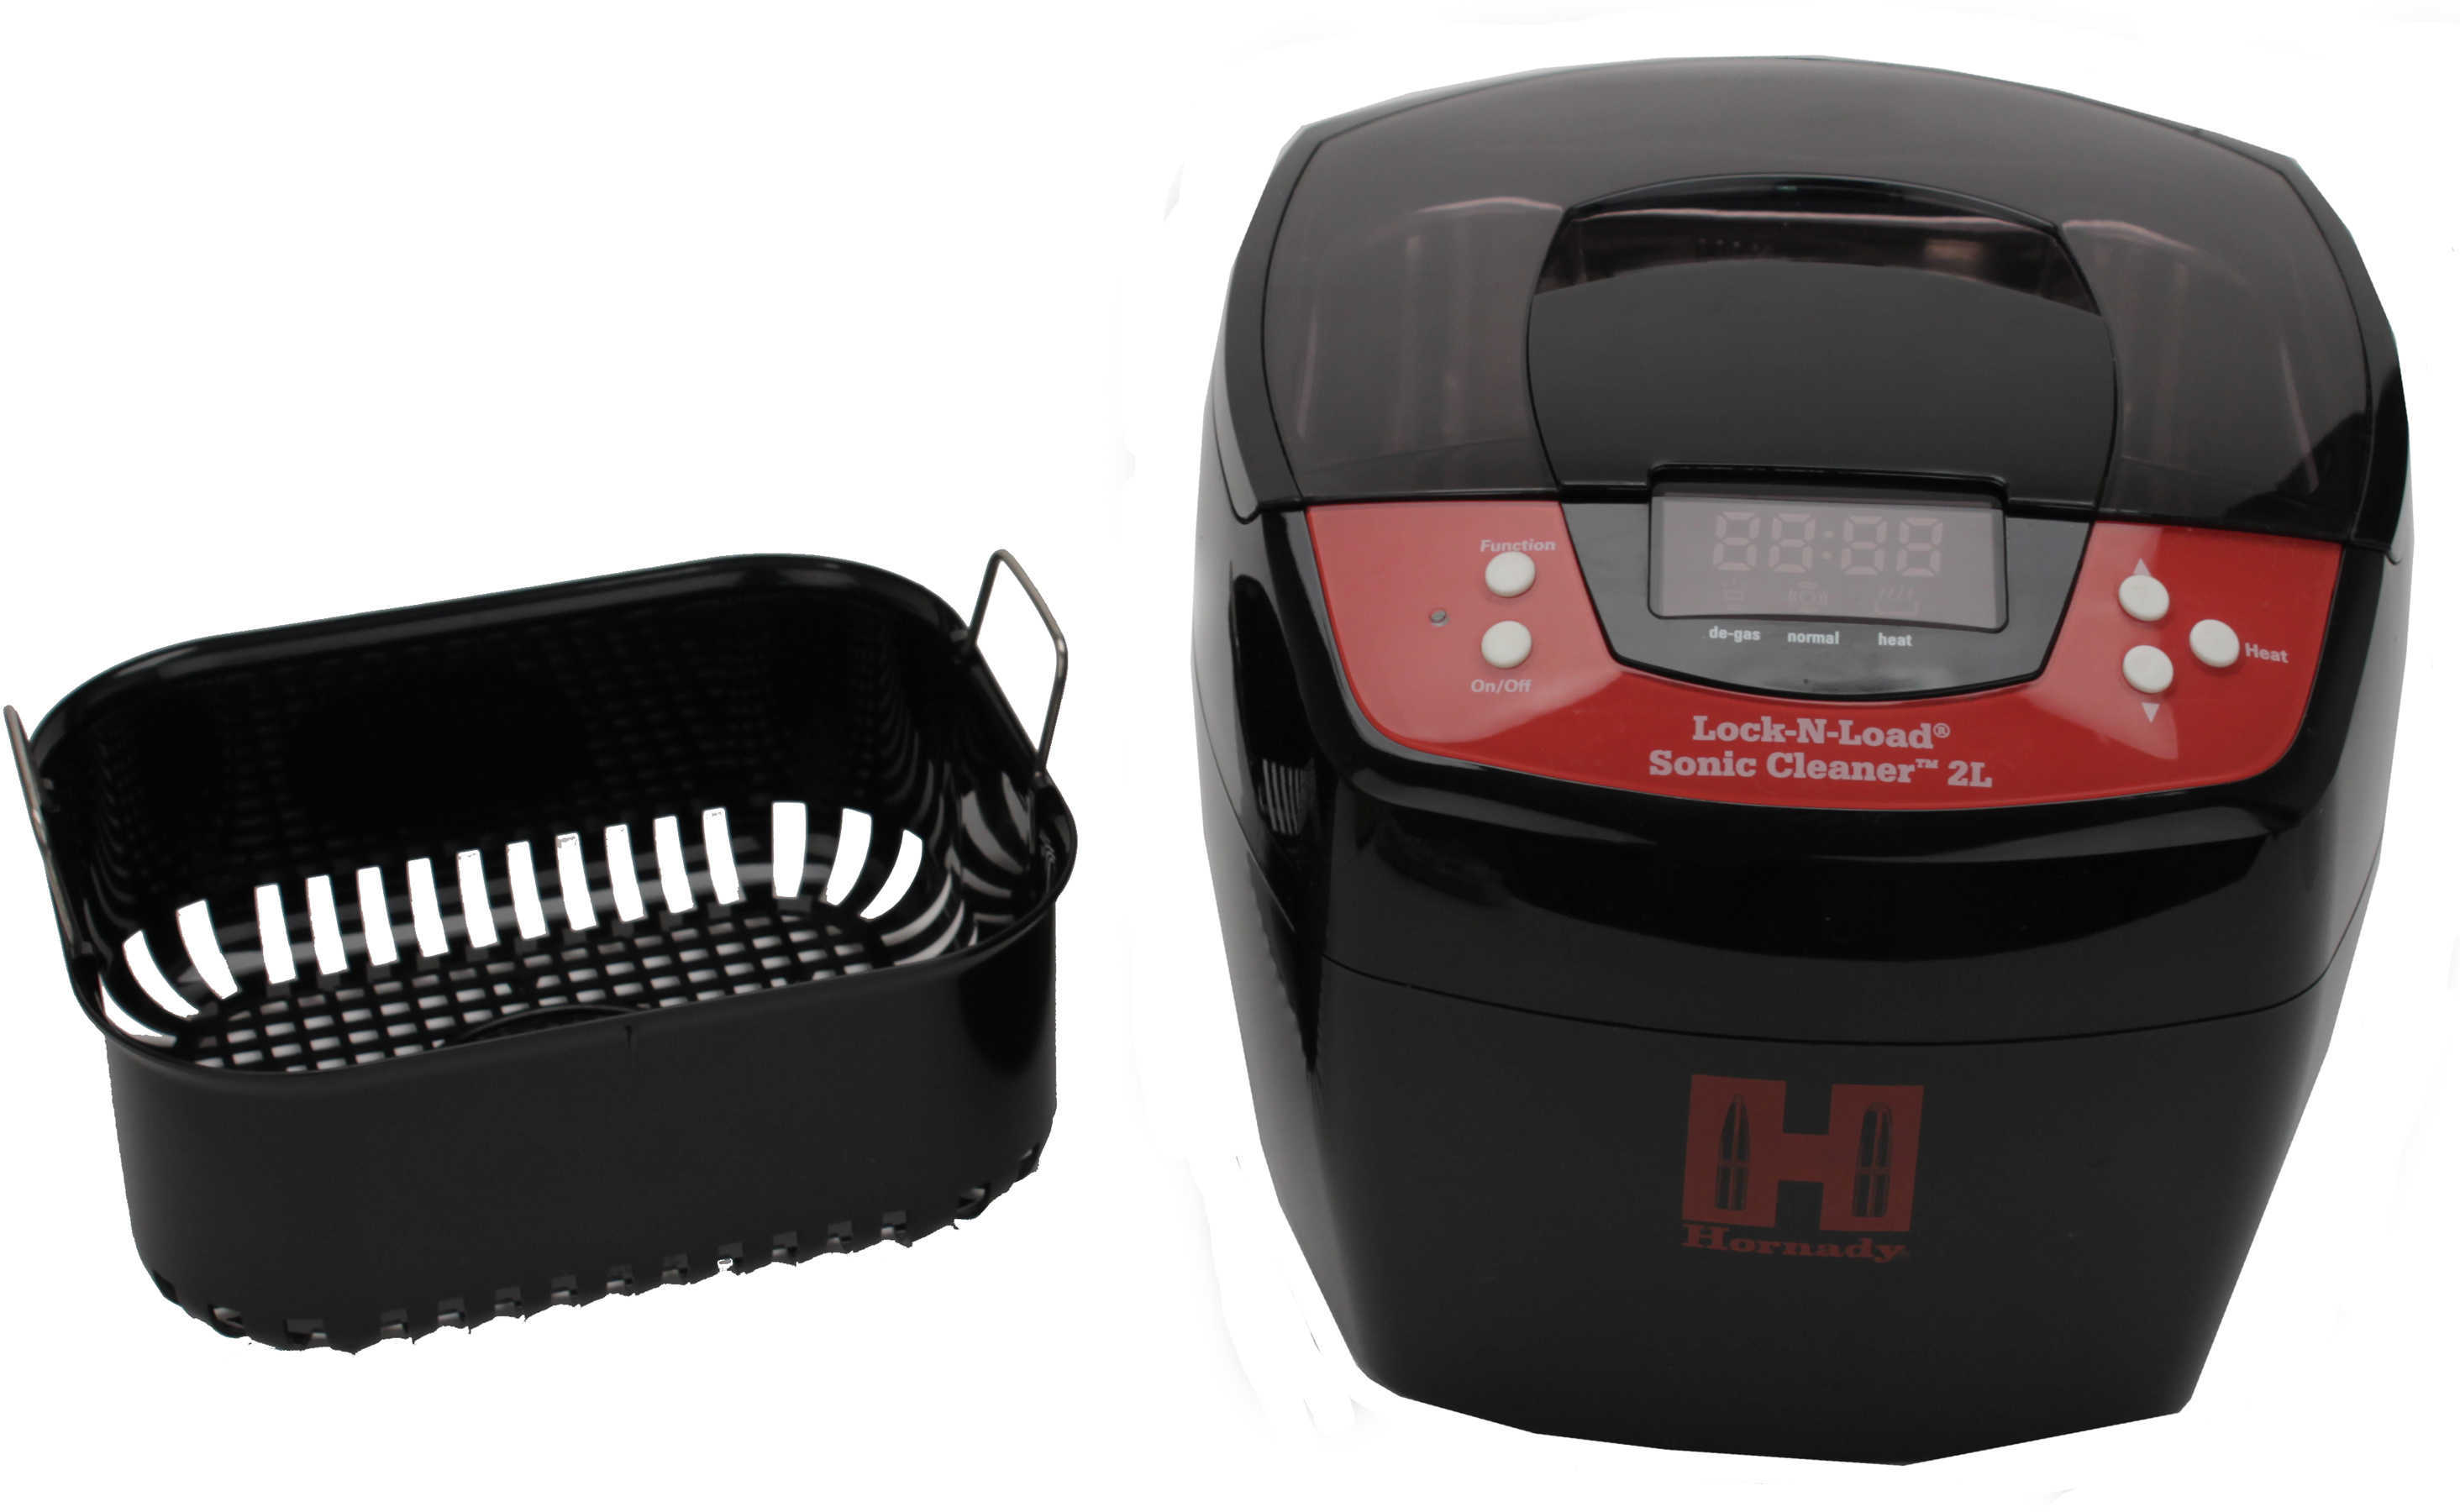 Hornady Lock-N-Load Sonic Cleaner 2 Liter Heated 110 Volt